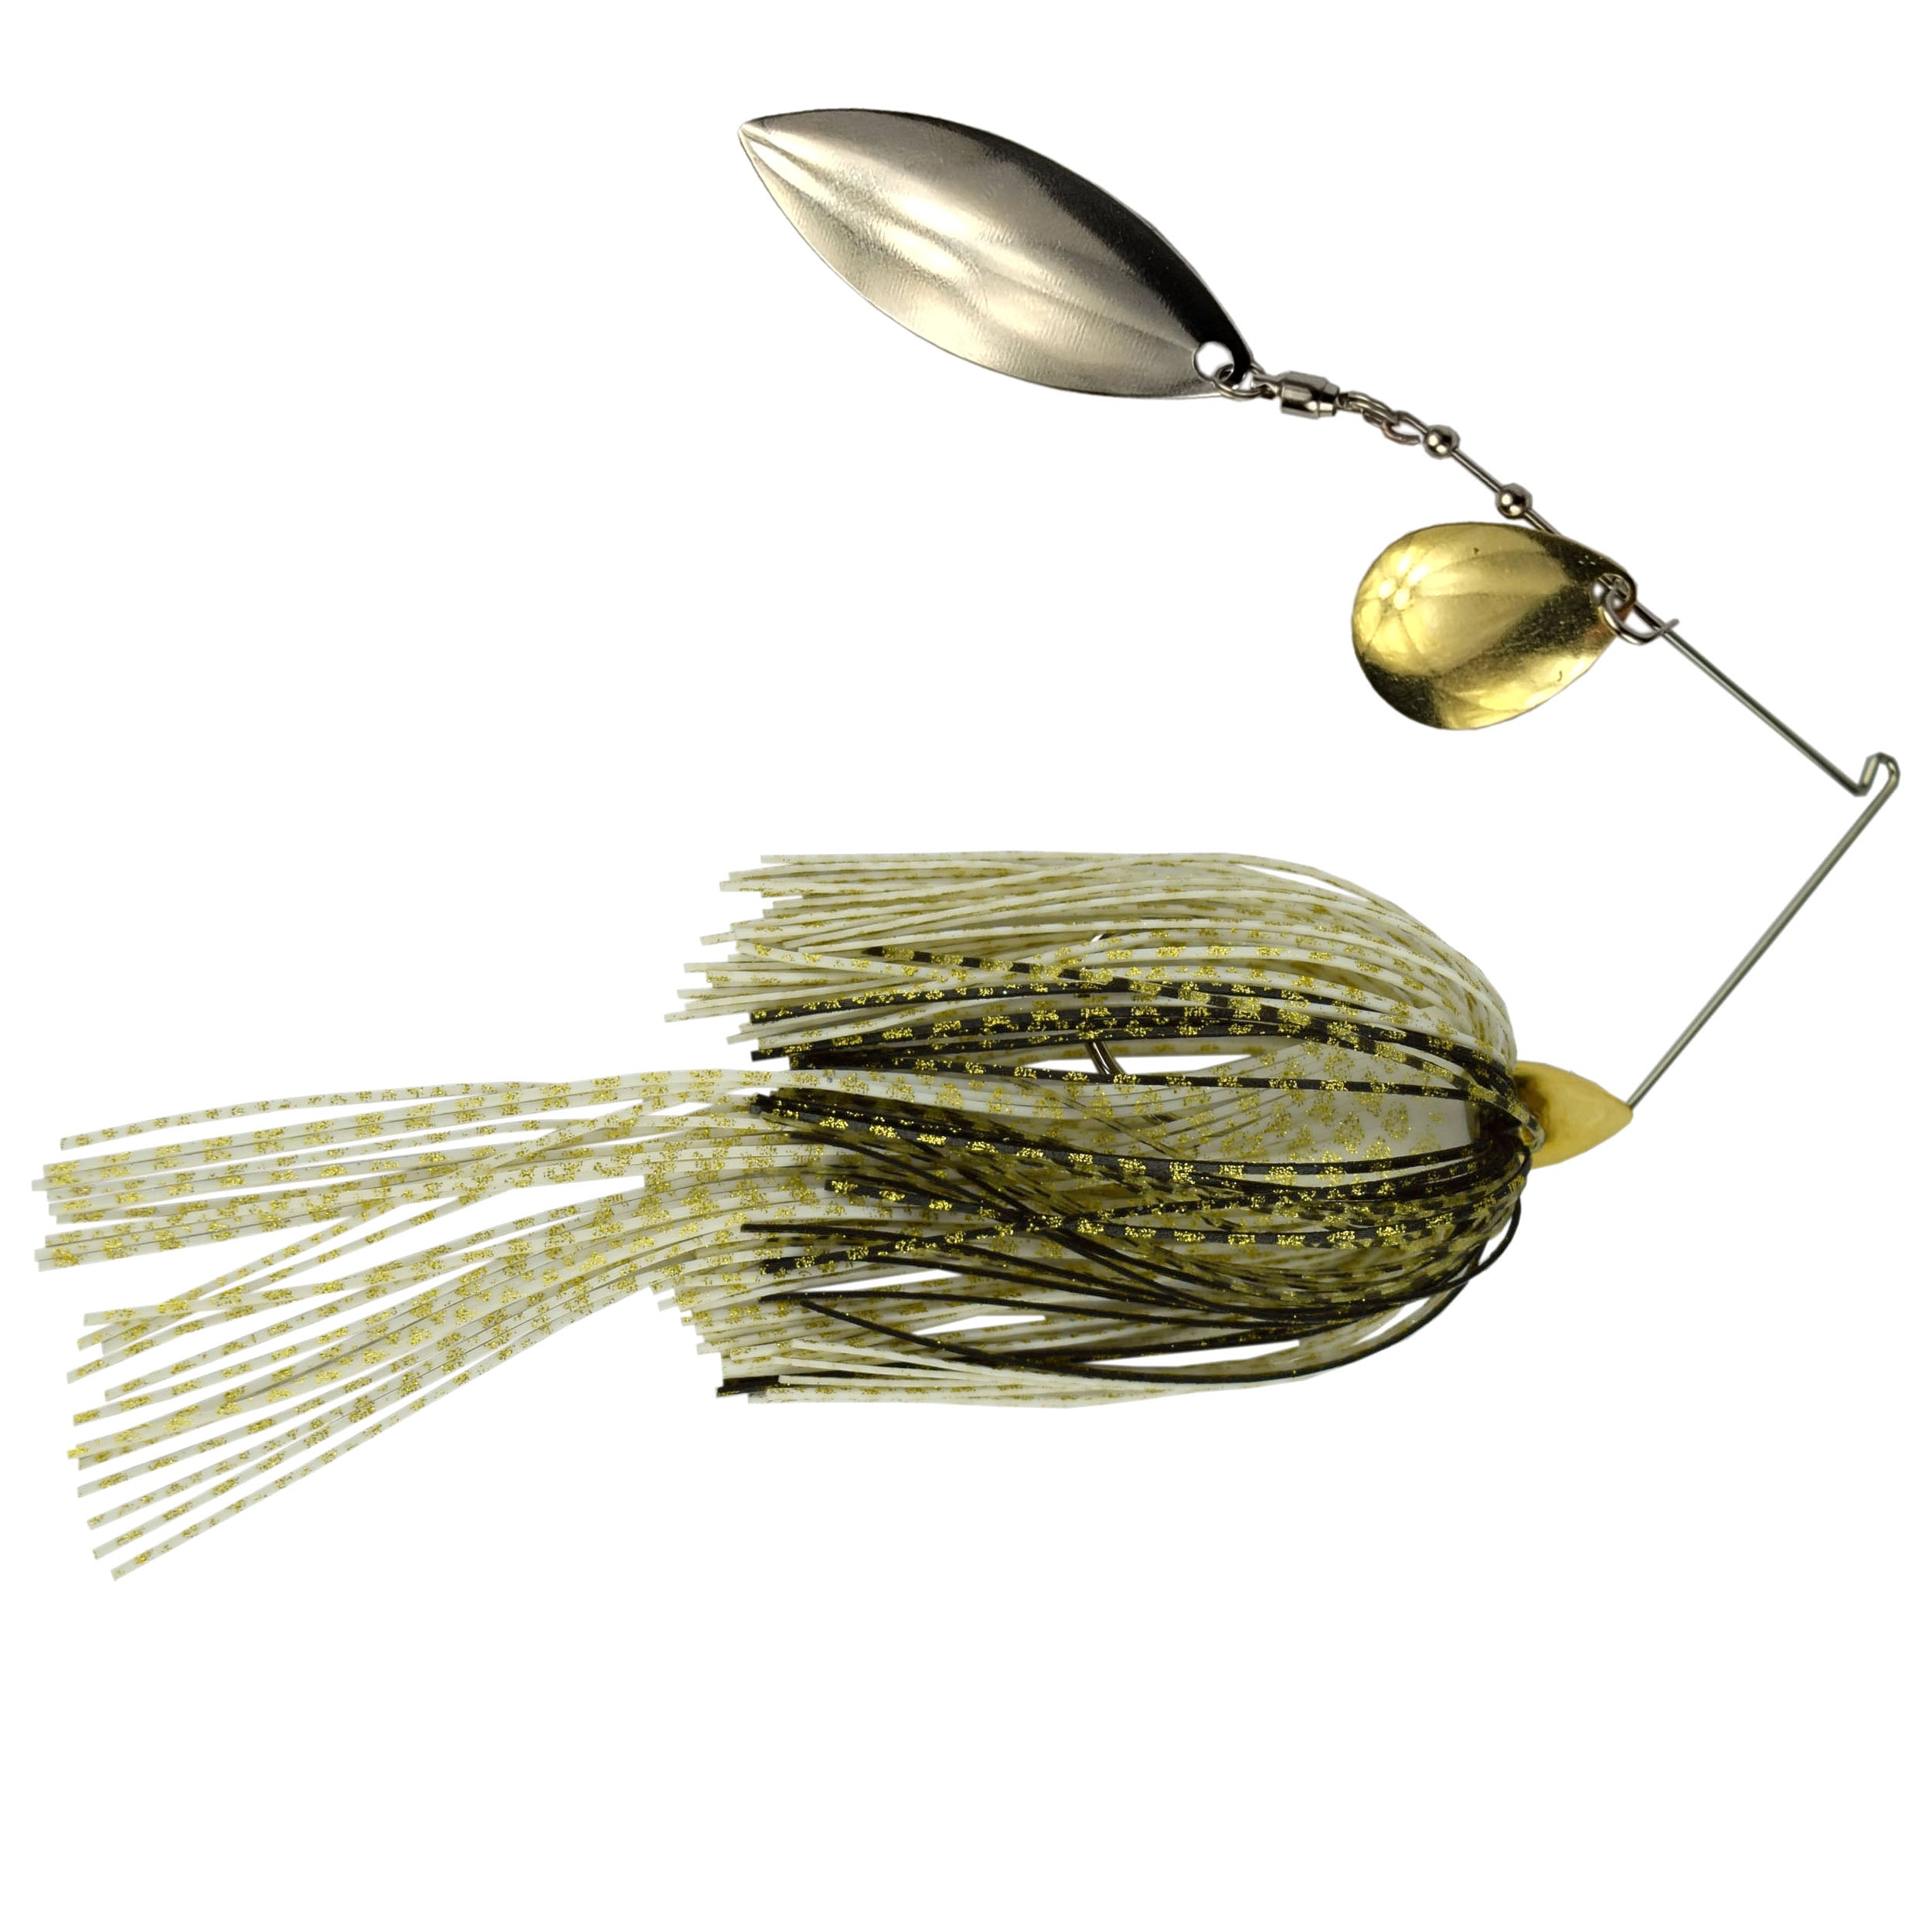 Tackle HD CS-II-CW Spinnerbait 3/4-Ounce - Golden Shiner